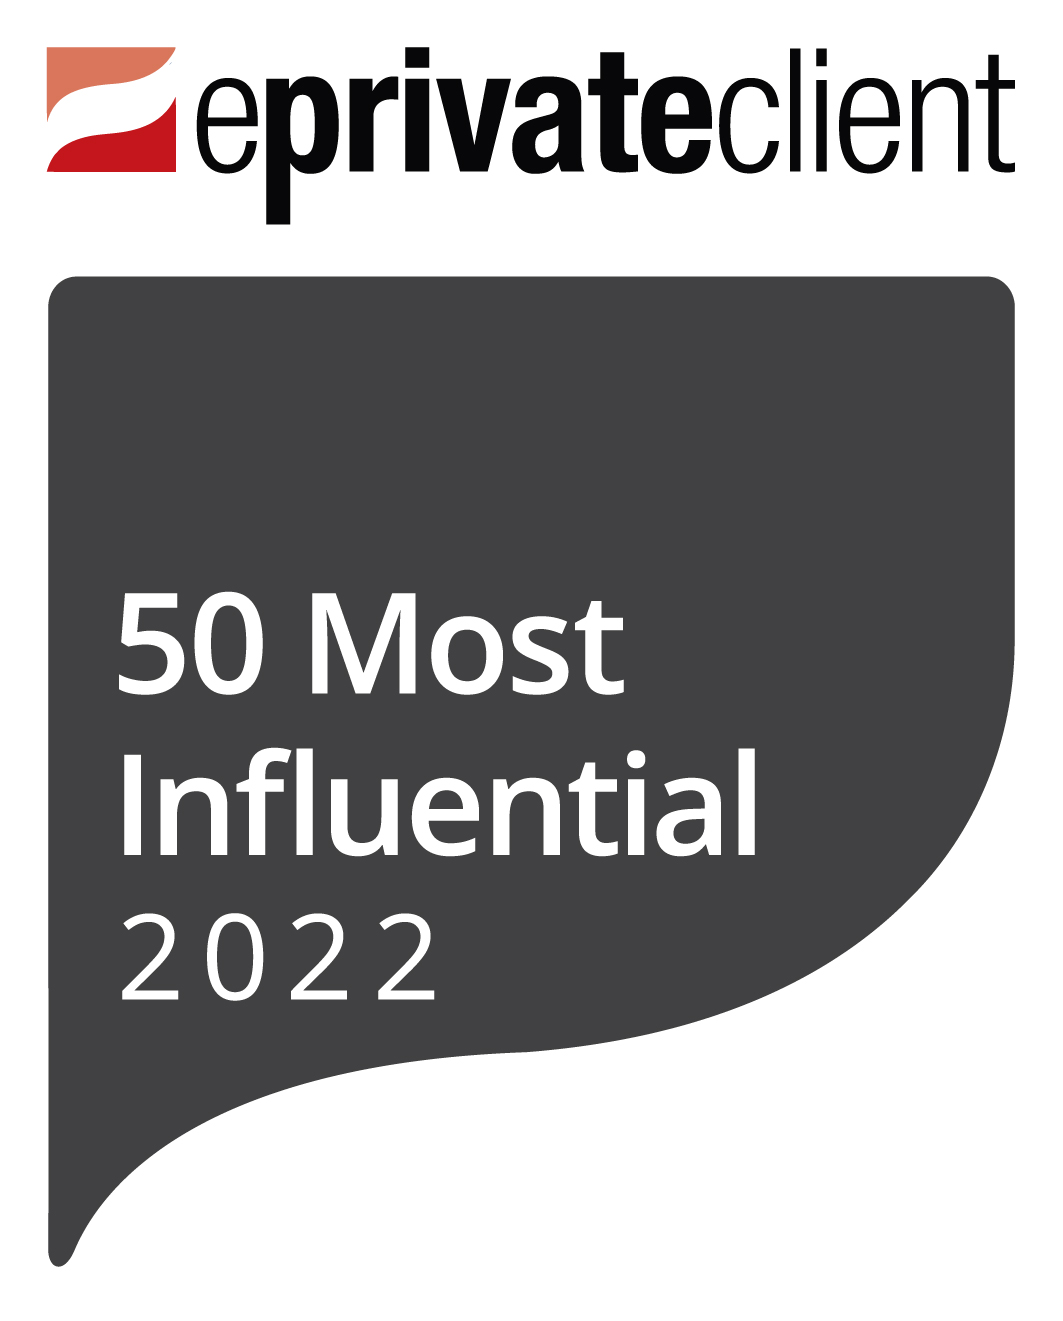 EXCLUSIVE: 2022 eprivateclient 50 Most Influential revealed